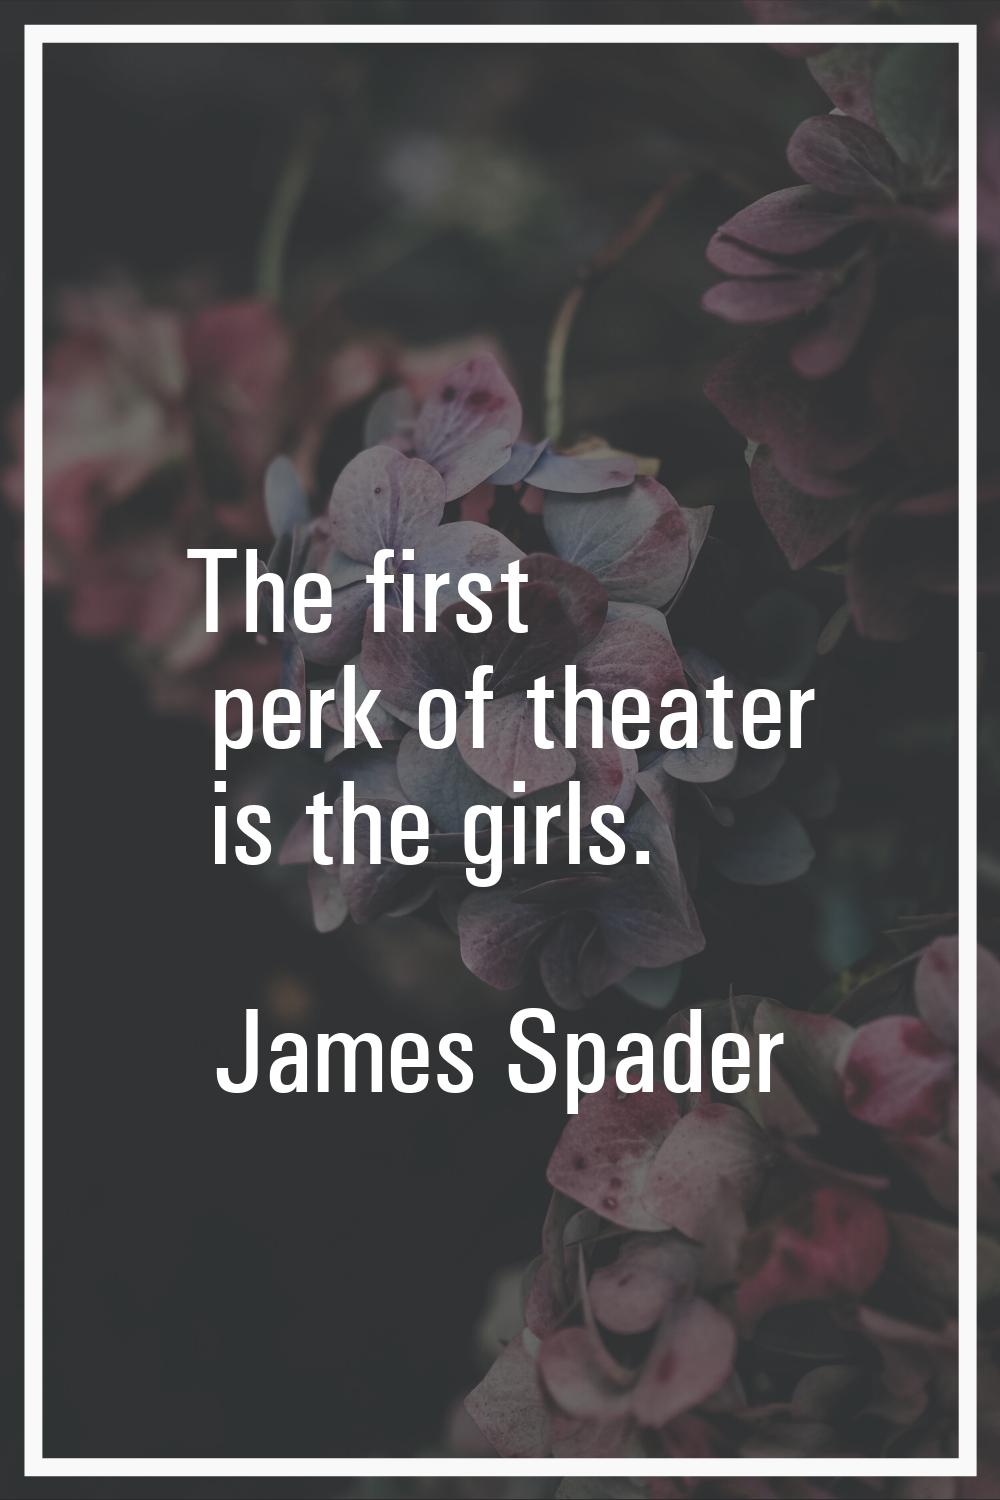 The first perk of theater is the girls.